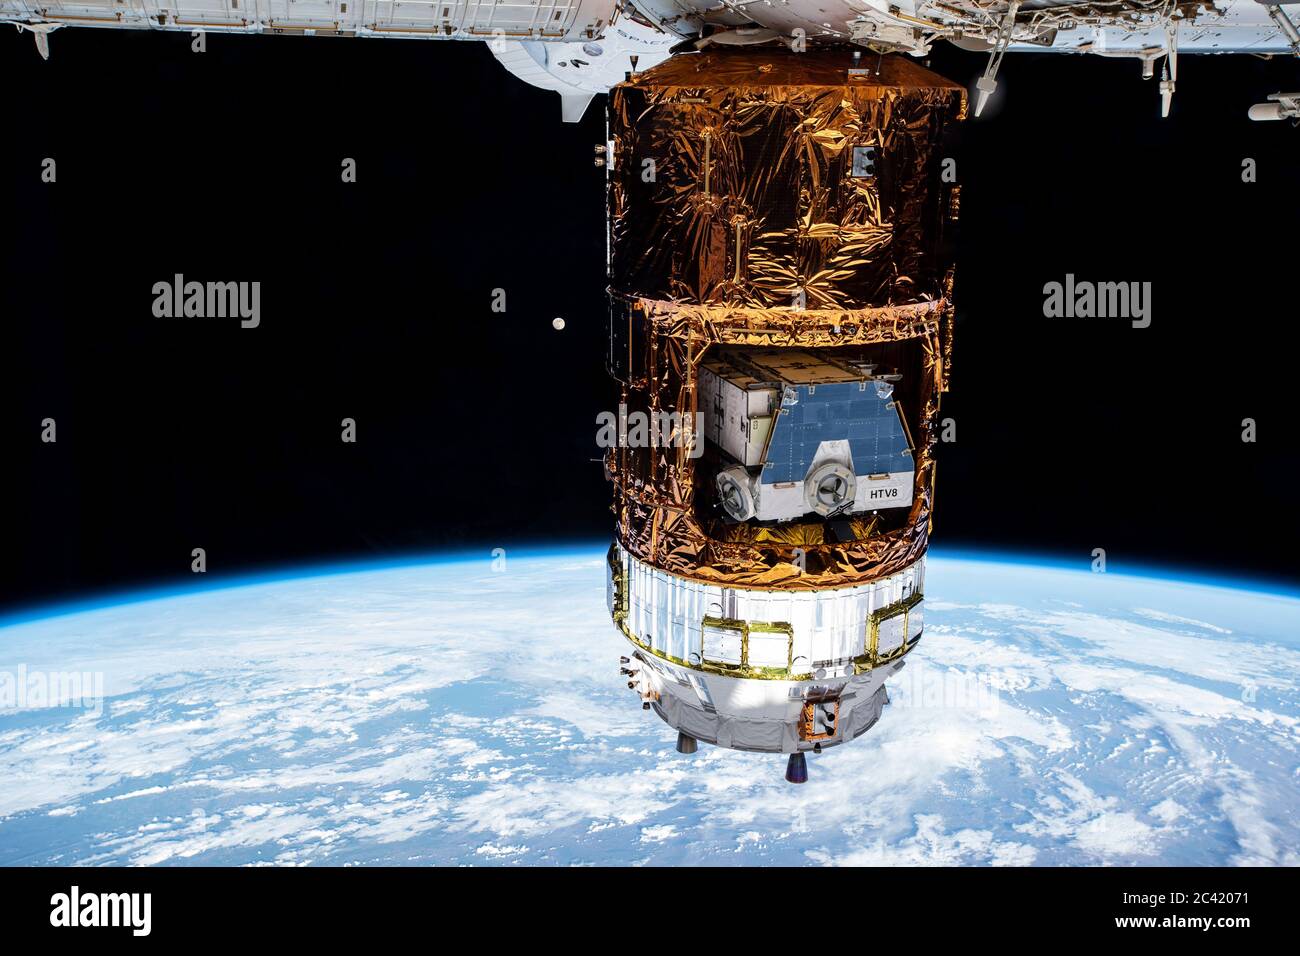 H-II Transfer Vehicle-9 (HTV-9), Japan's resupply ship, attached to the International Space Station's Harmony module. HTV-8 cargo pallet stowed inside Stock Photo